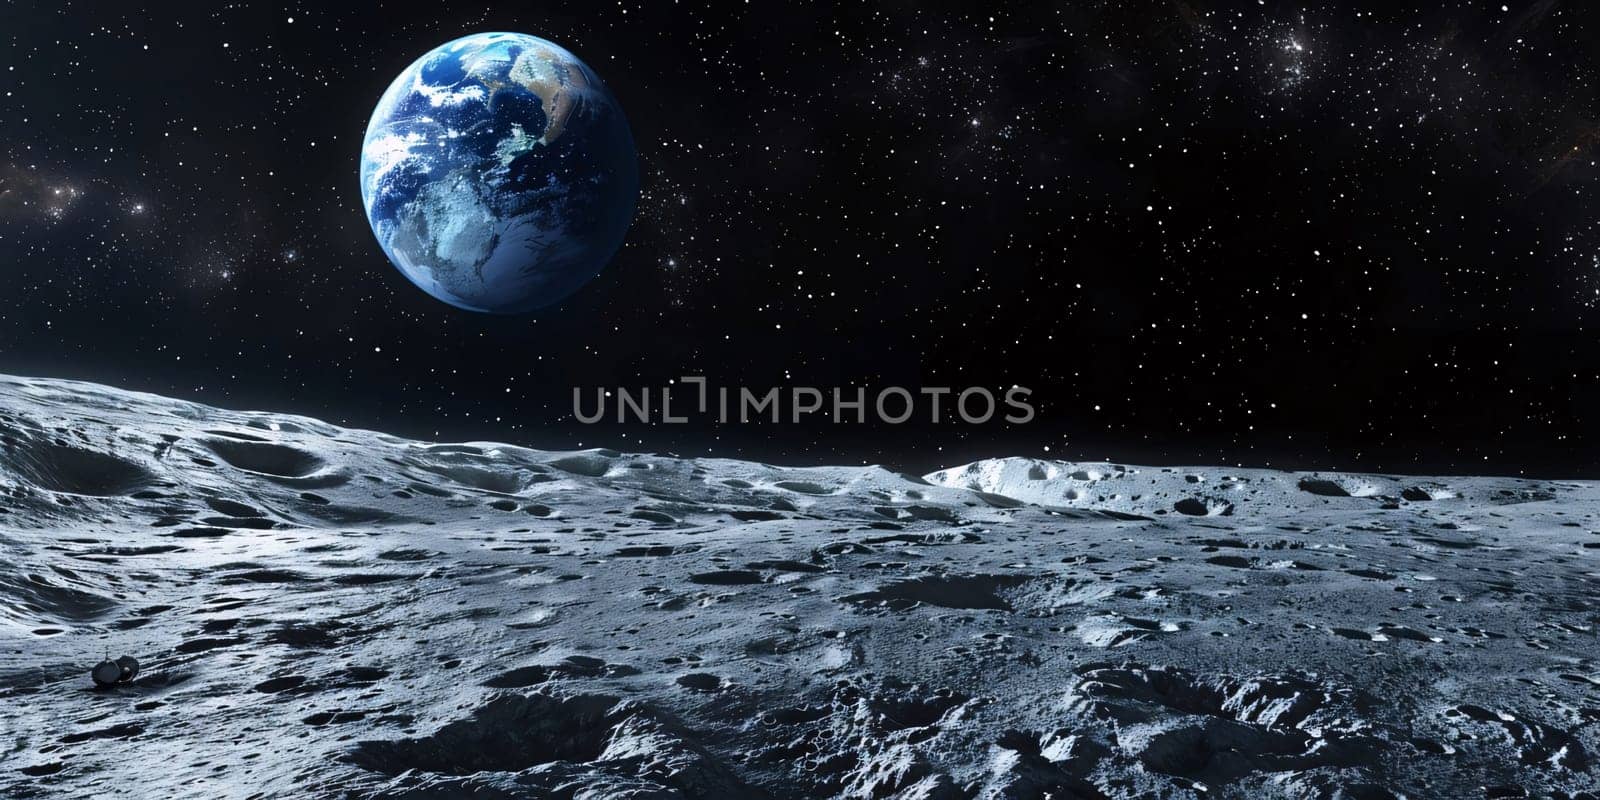 Earth Day: View of the planet Earth from the moon in outer space showing the beauty of space exploration.